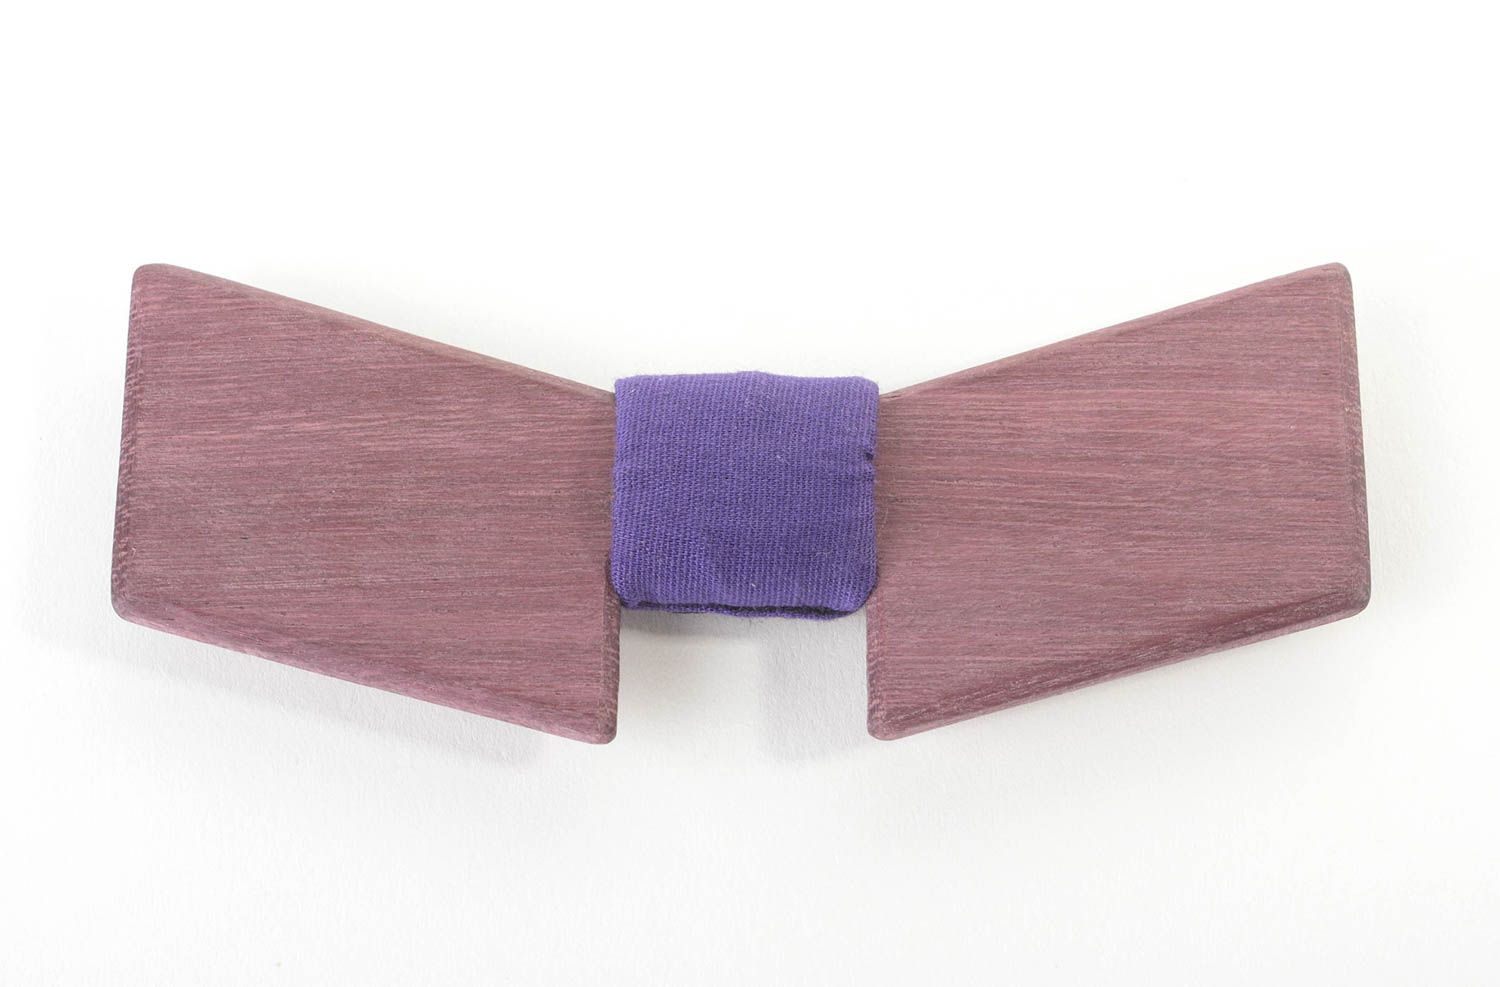 Handmade wooden bow ties designer bow ties for men nice present for friend photo 3